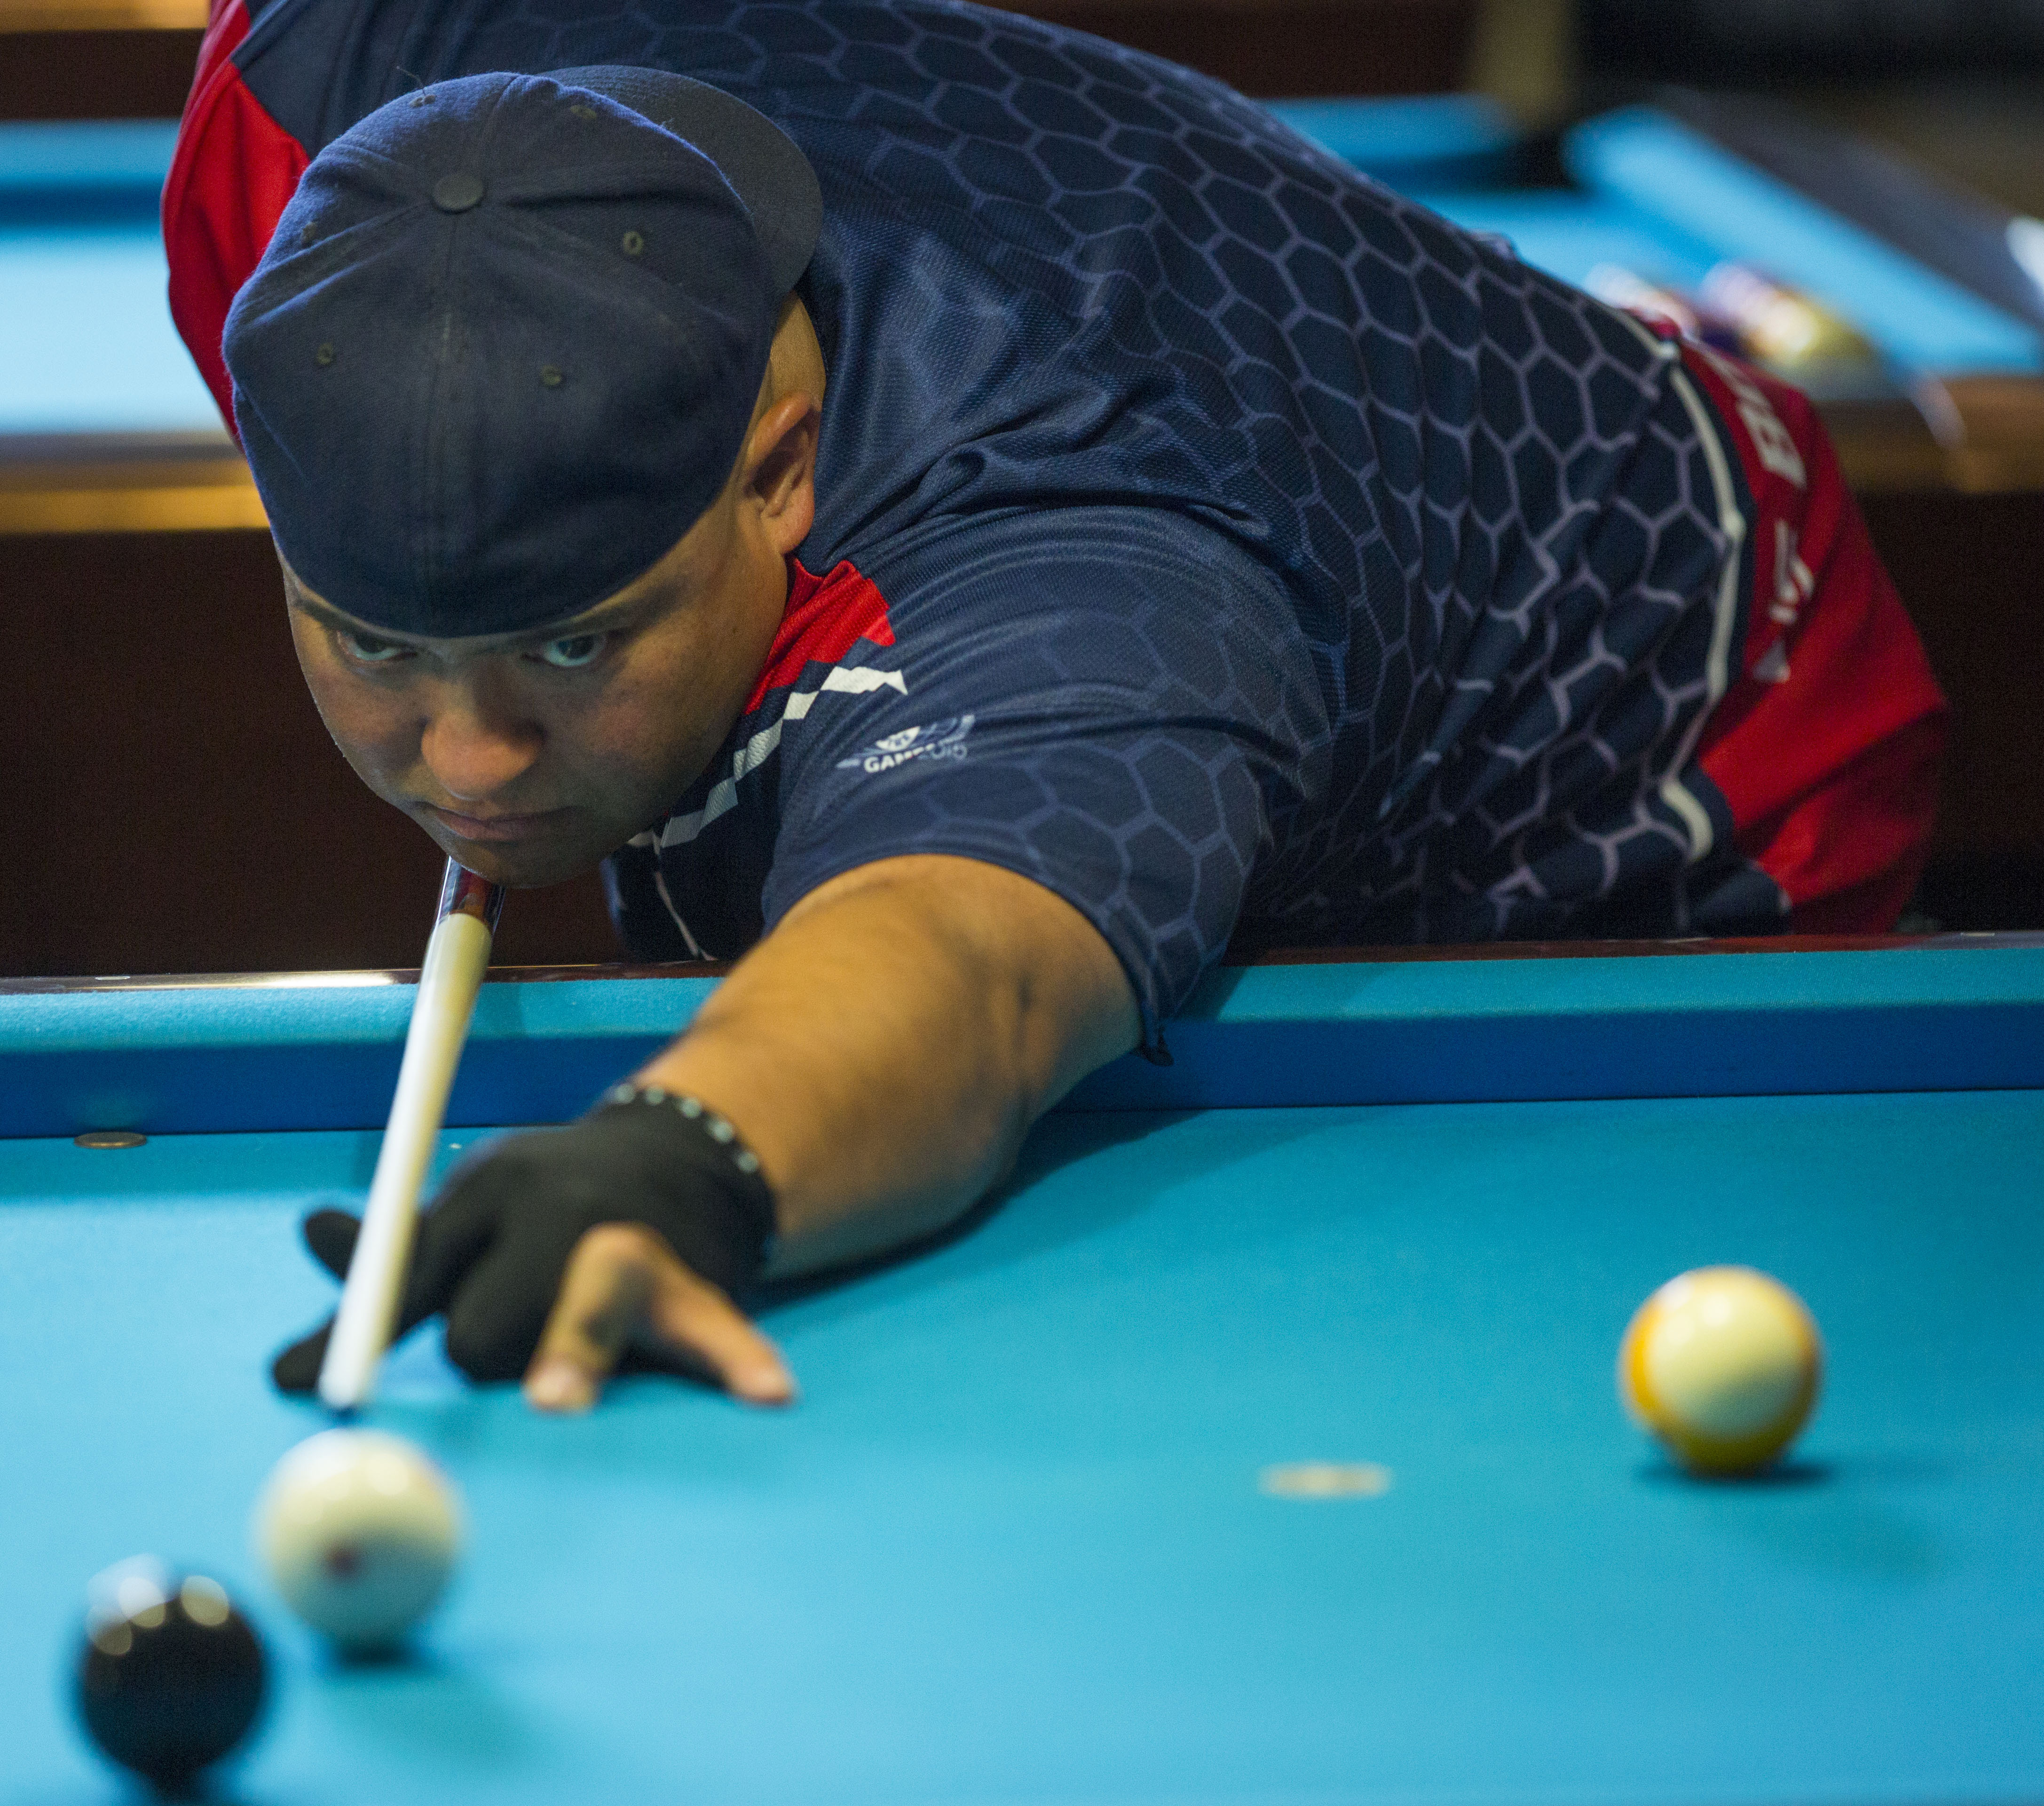 Sighting a winning shot, Border Patrol Agent James Garcia competes in the pocket billiards contest at the 2015 World Police & Fire Games. Photo by James Tourtellotte